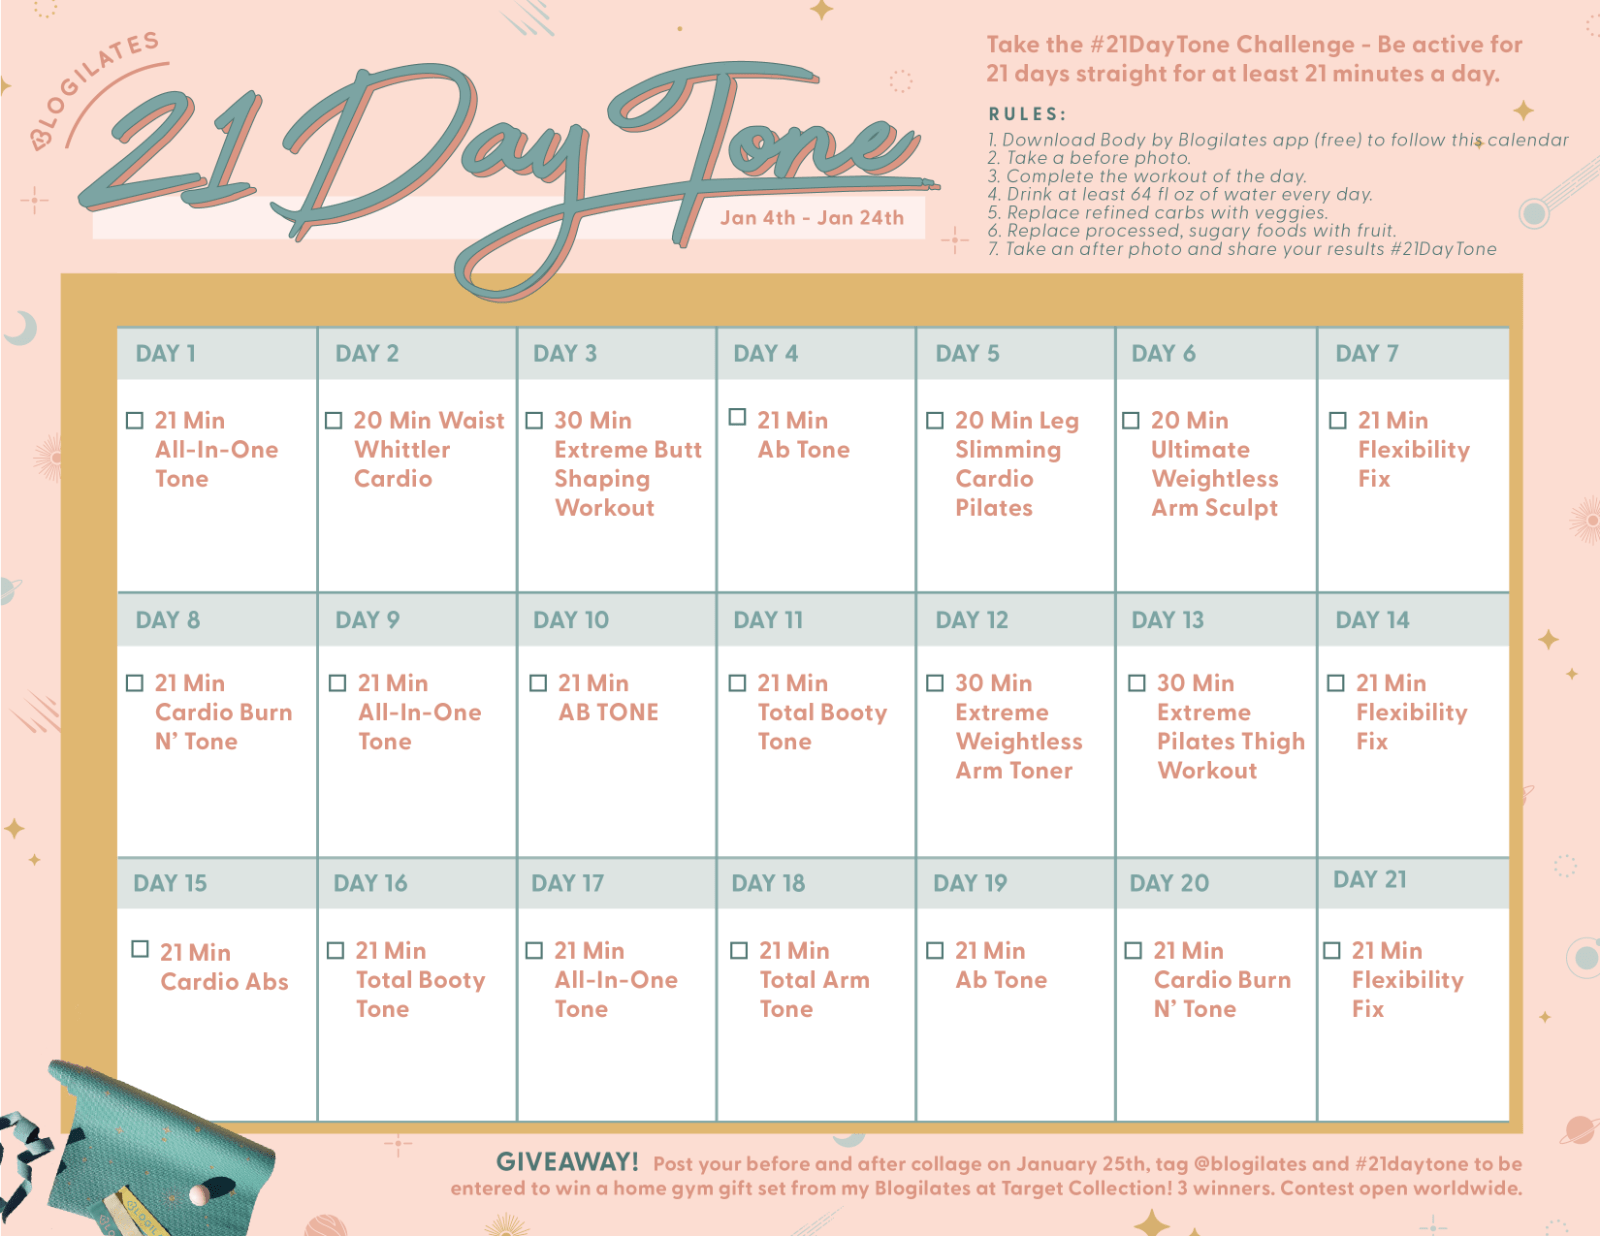 Mark your calendar! Our annual 21 Day Yoga Challenge is back